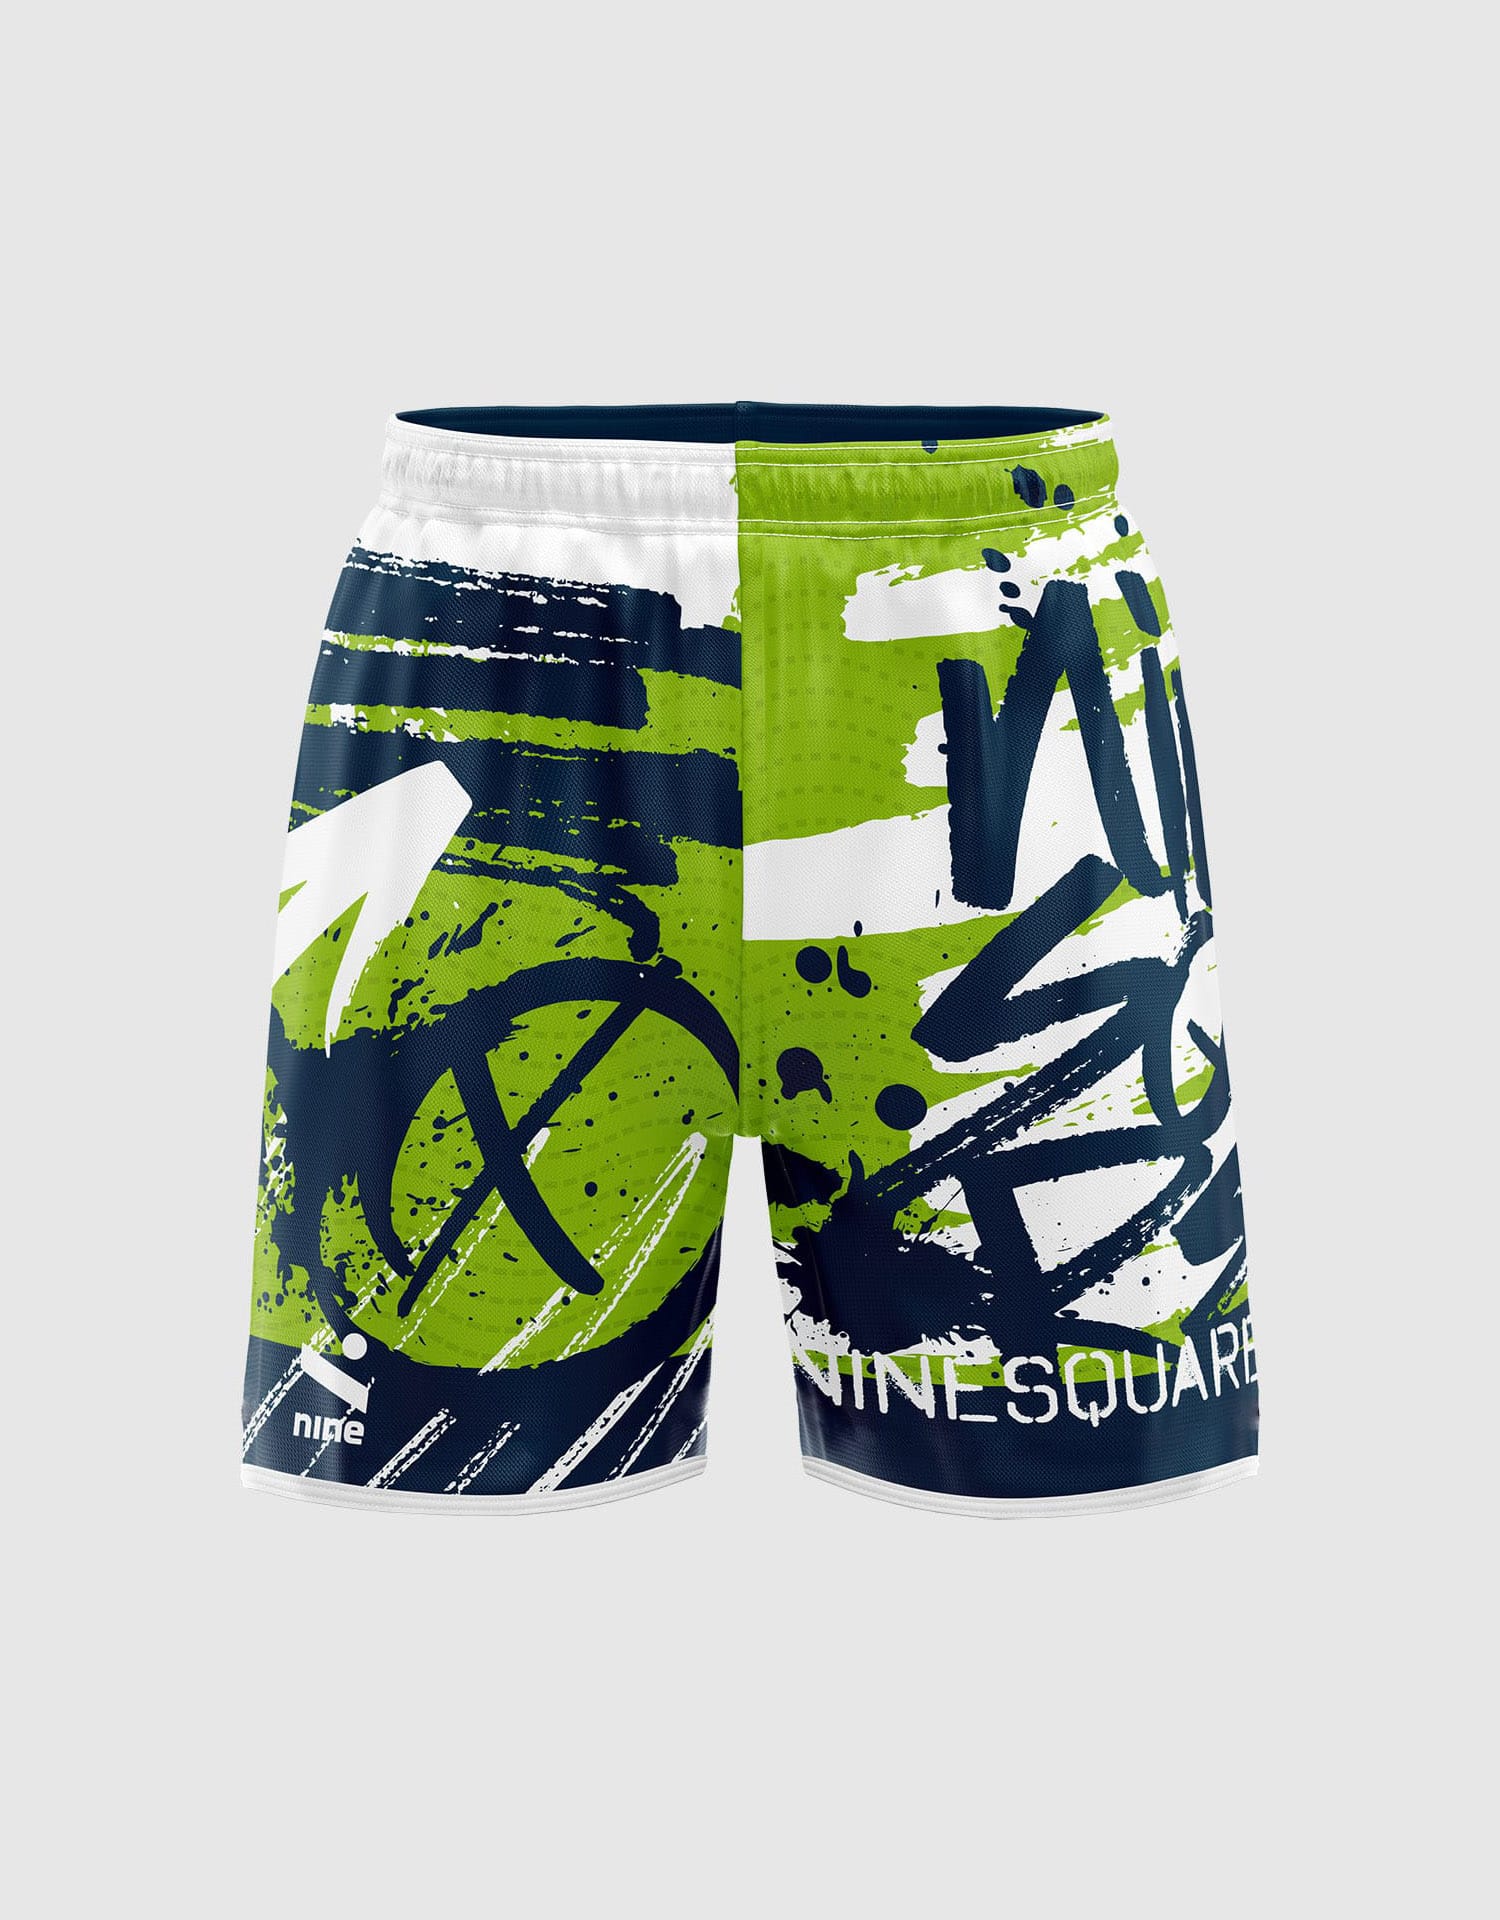 ninesquared-beach-volley-los-angeles-shorts-M-03